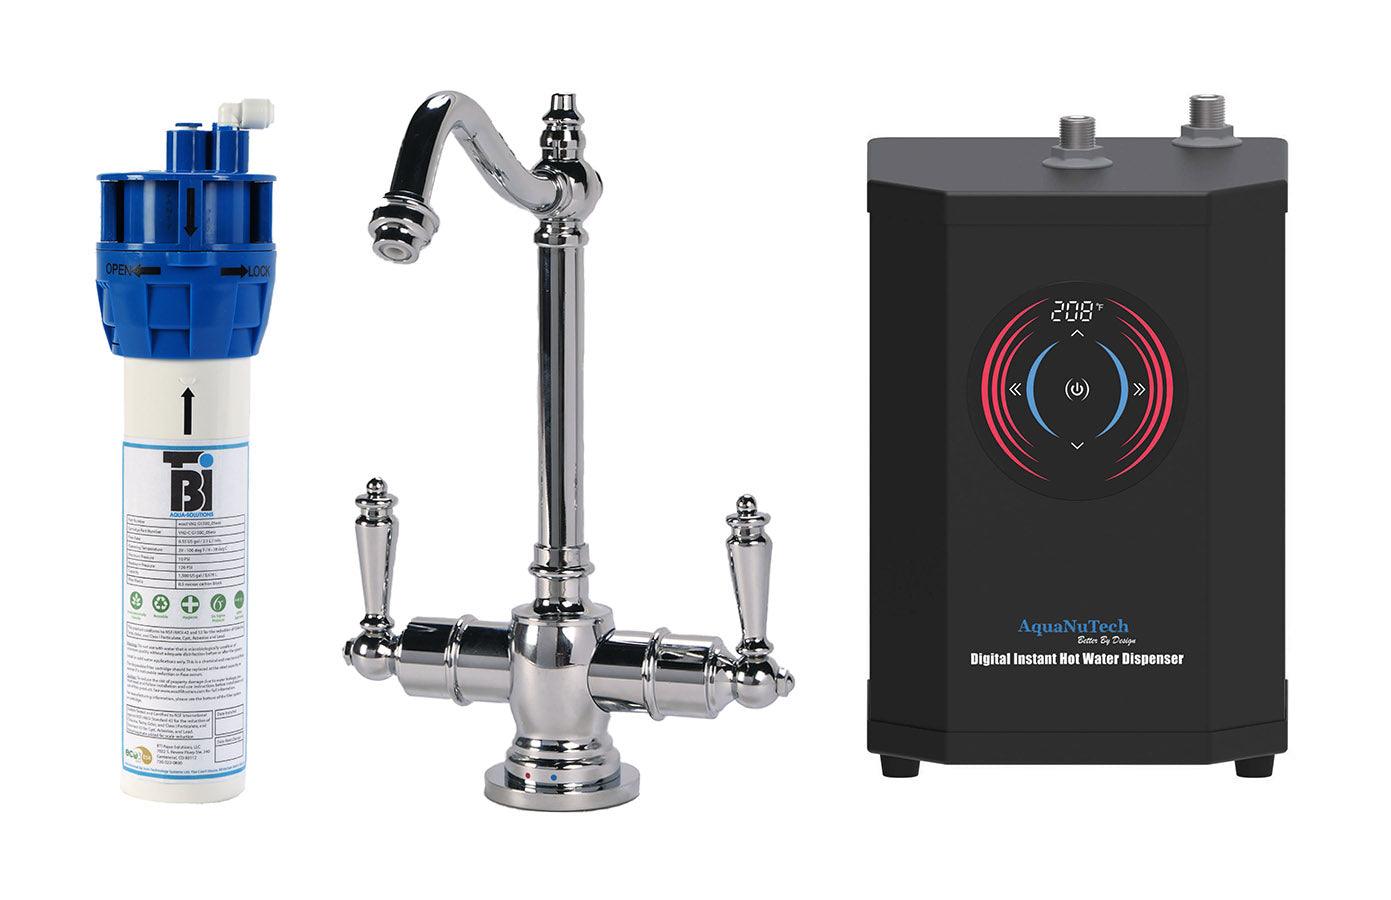 Filtration/Hot Water Combo - Traditional Hook Spout Faucet With Digital Instant Hot Water Dispenser and Filtration System. Chrome